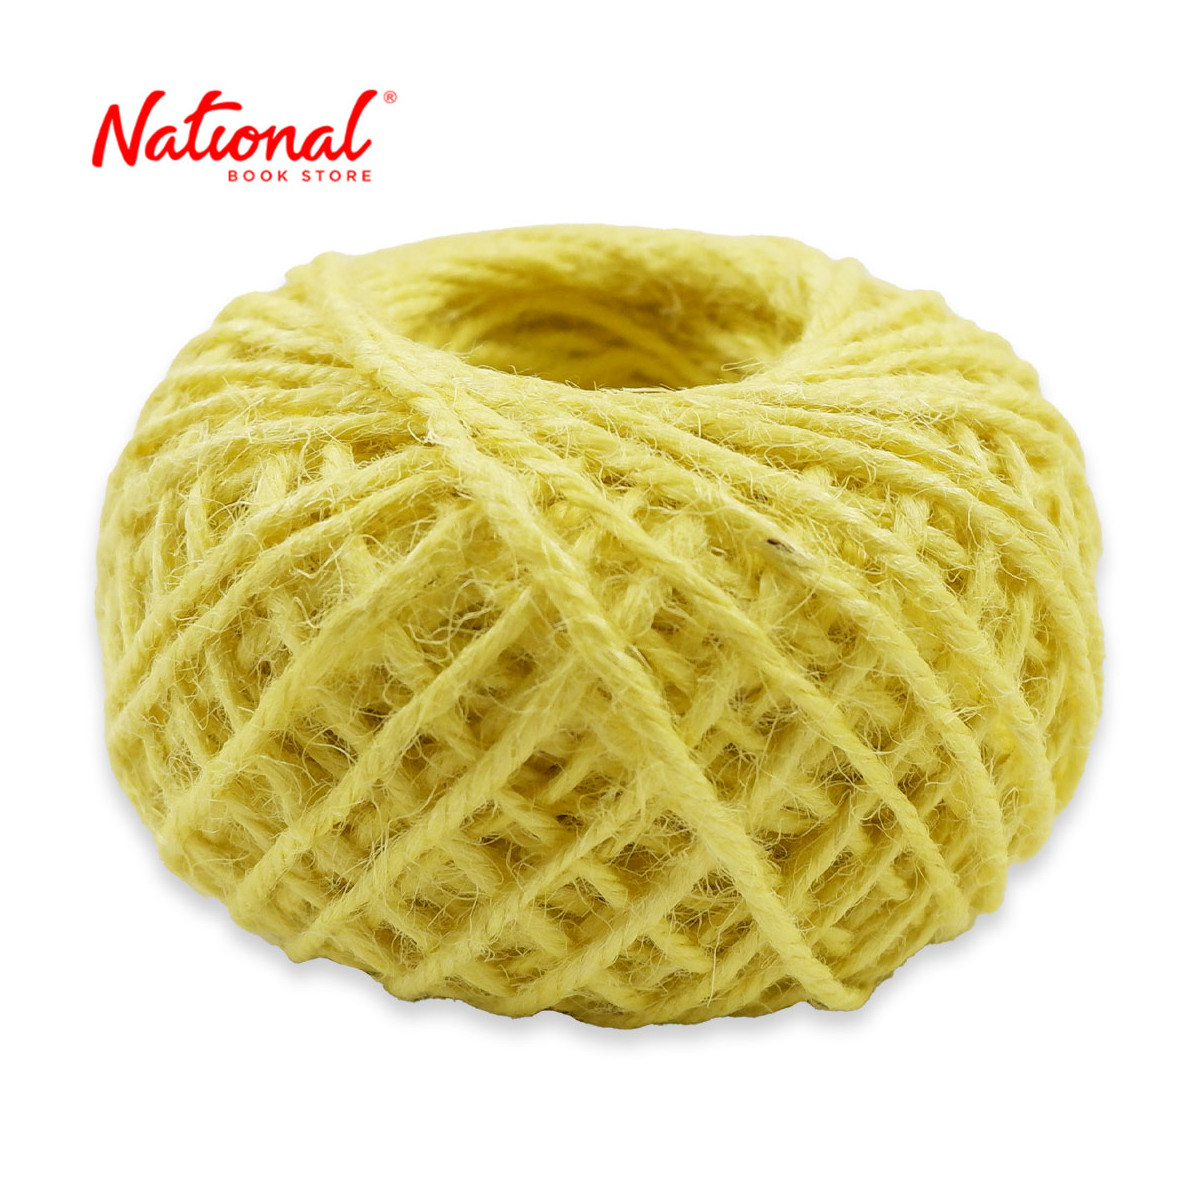 Jute String Roll T20 50 Meters, Light Yellow - Sewing Supplies